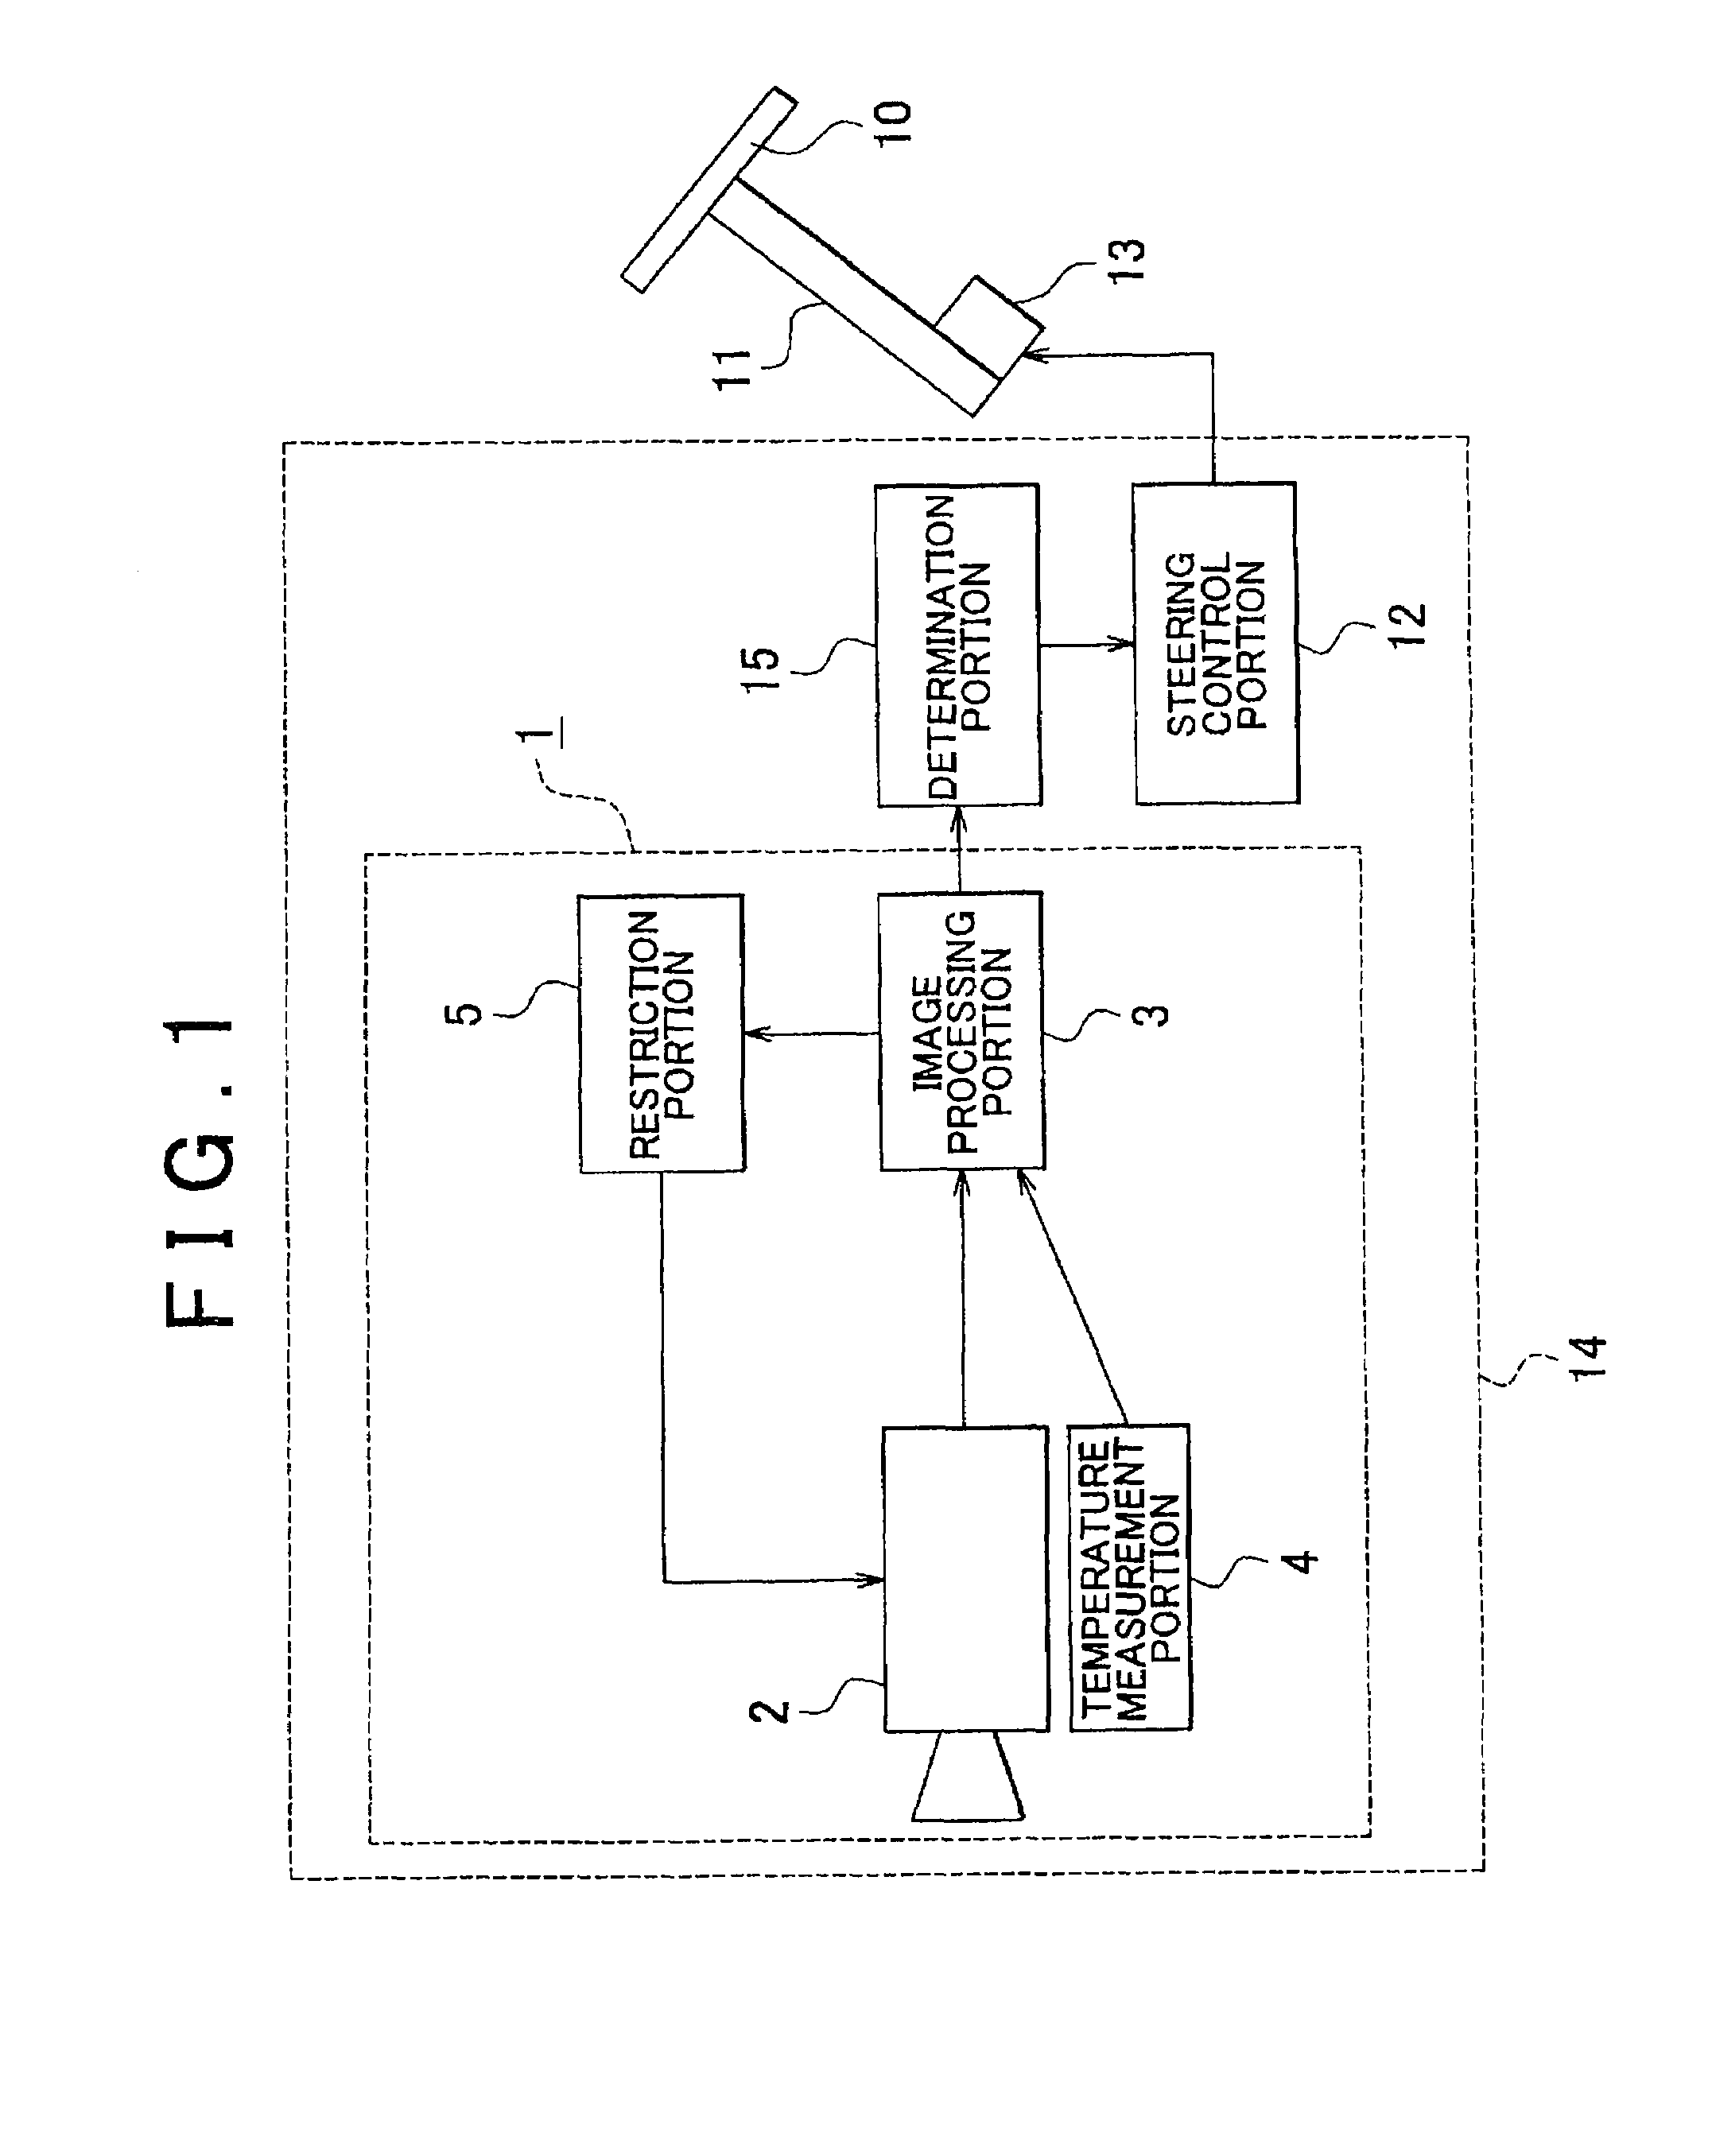 Road surface division mark recognition apparatus, and lane departure prevention apparatus